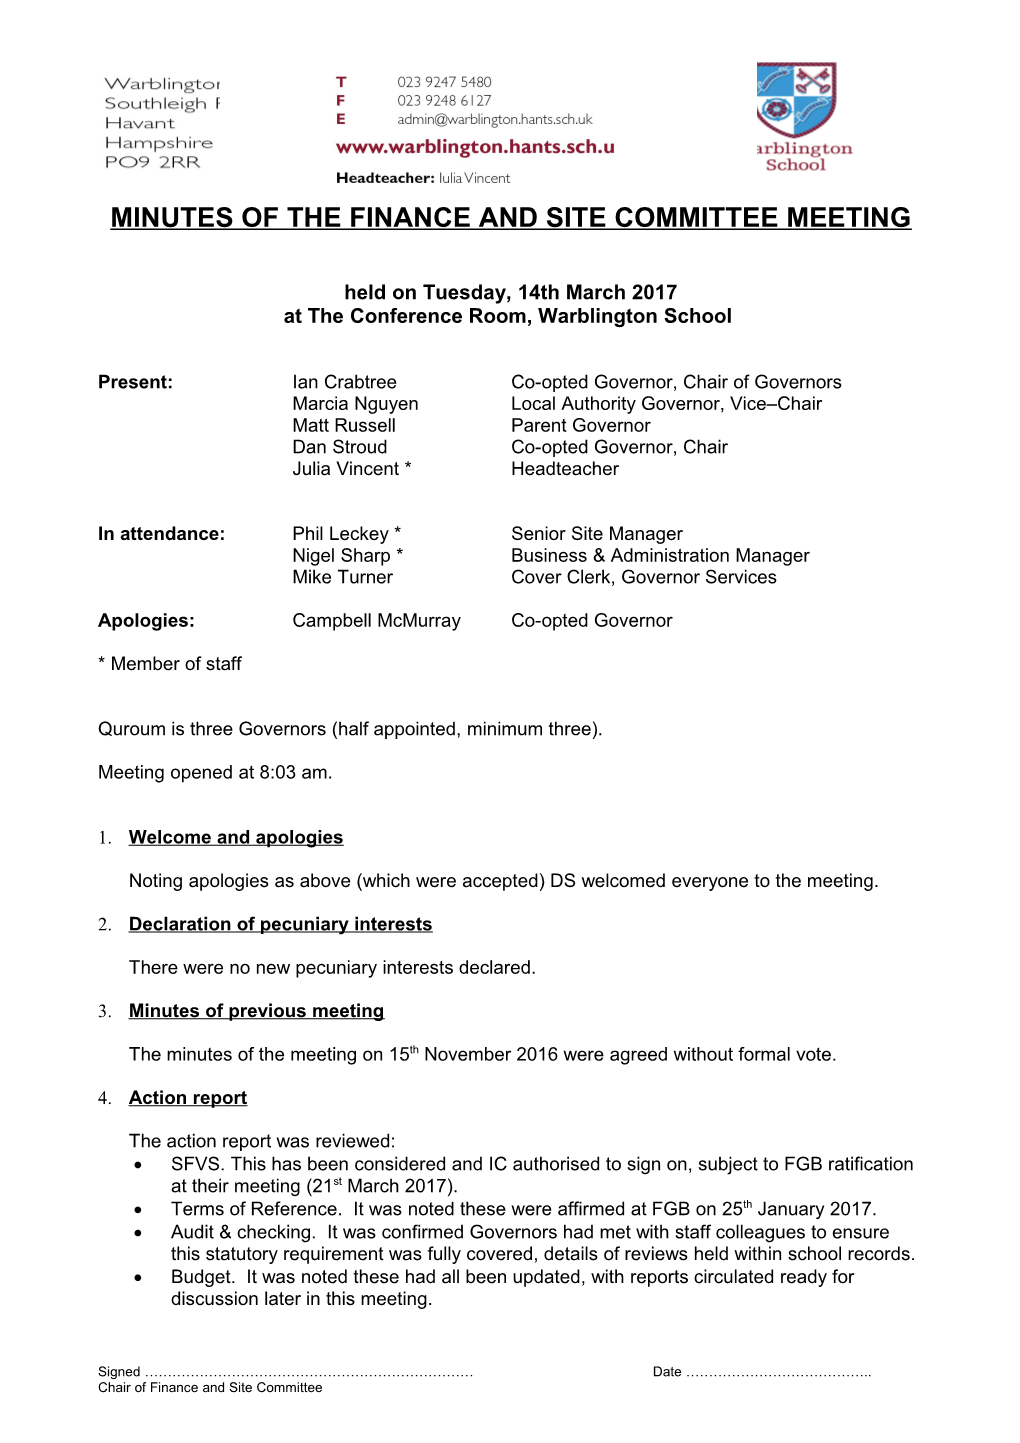 Minutes of the Finance and Site Committee Meeting